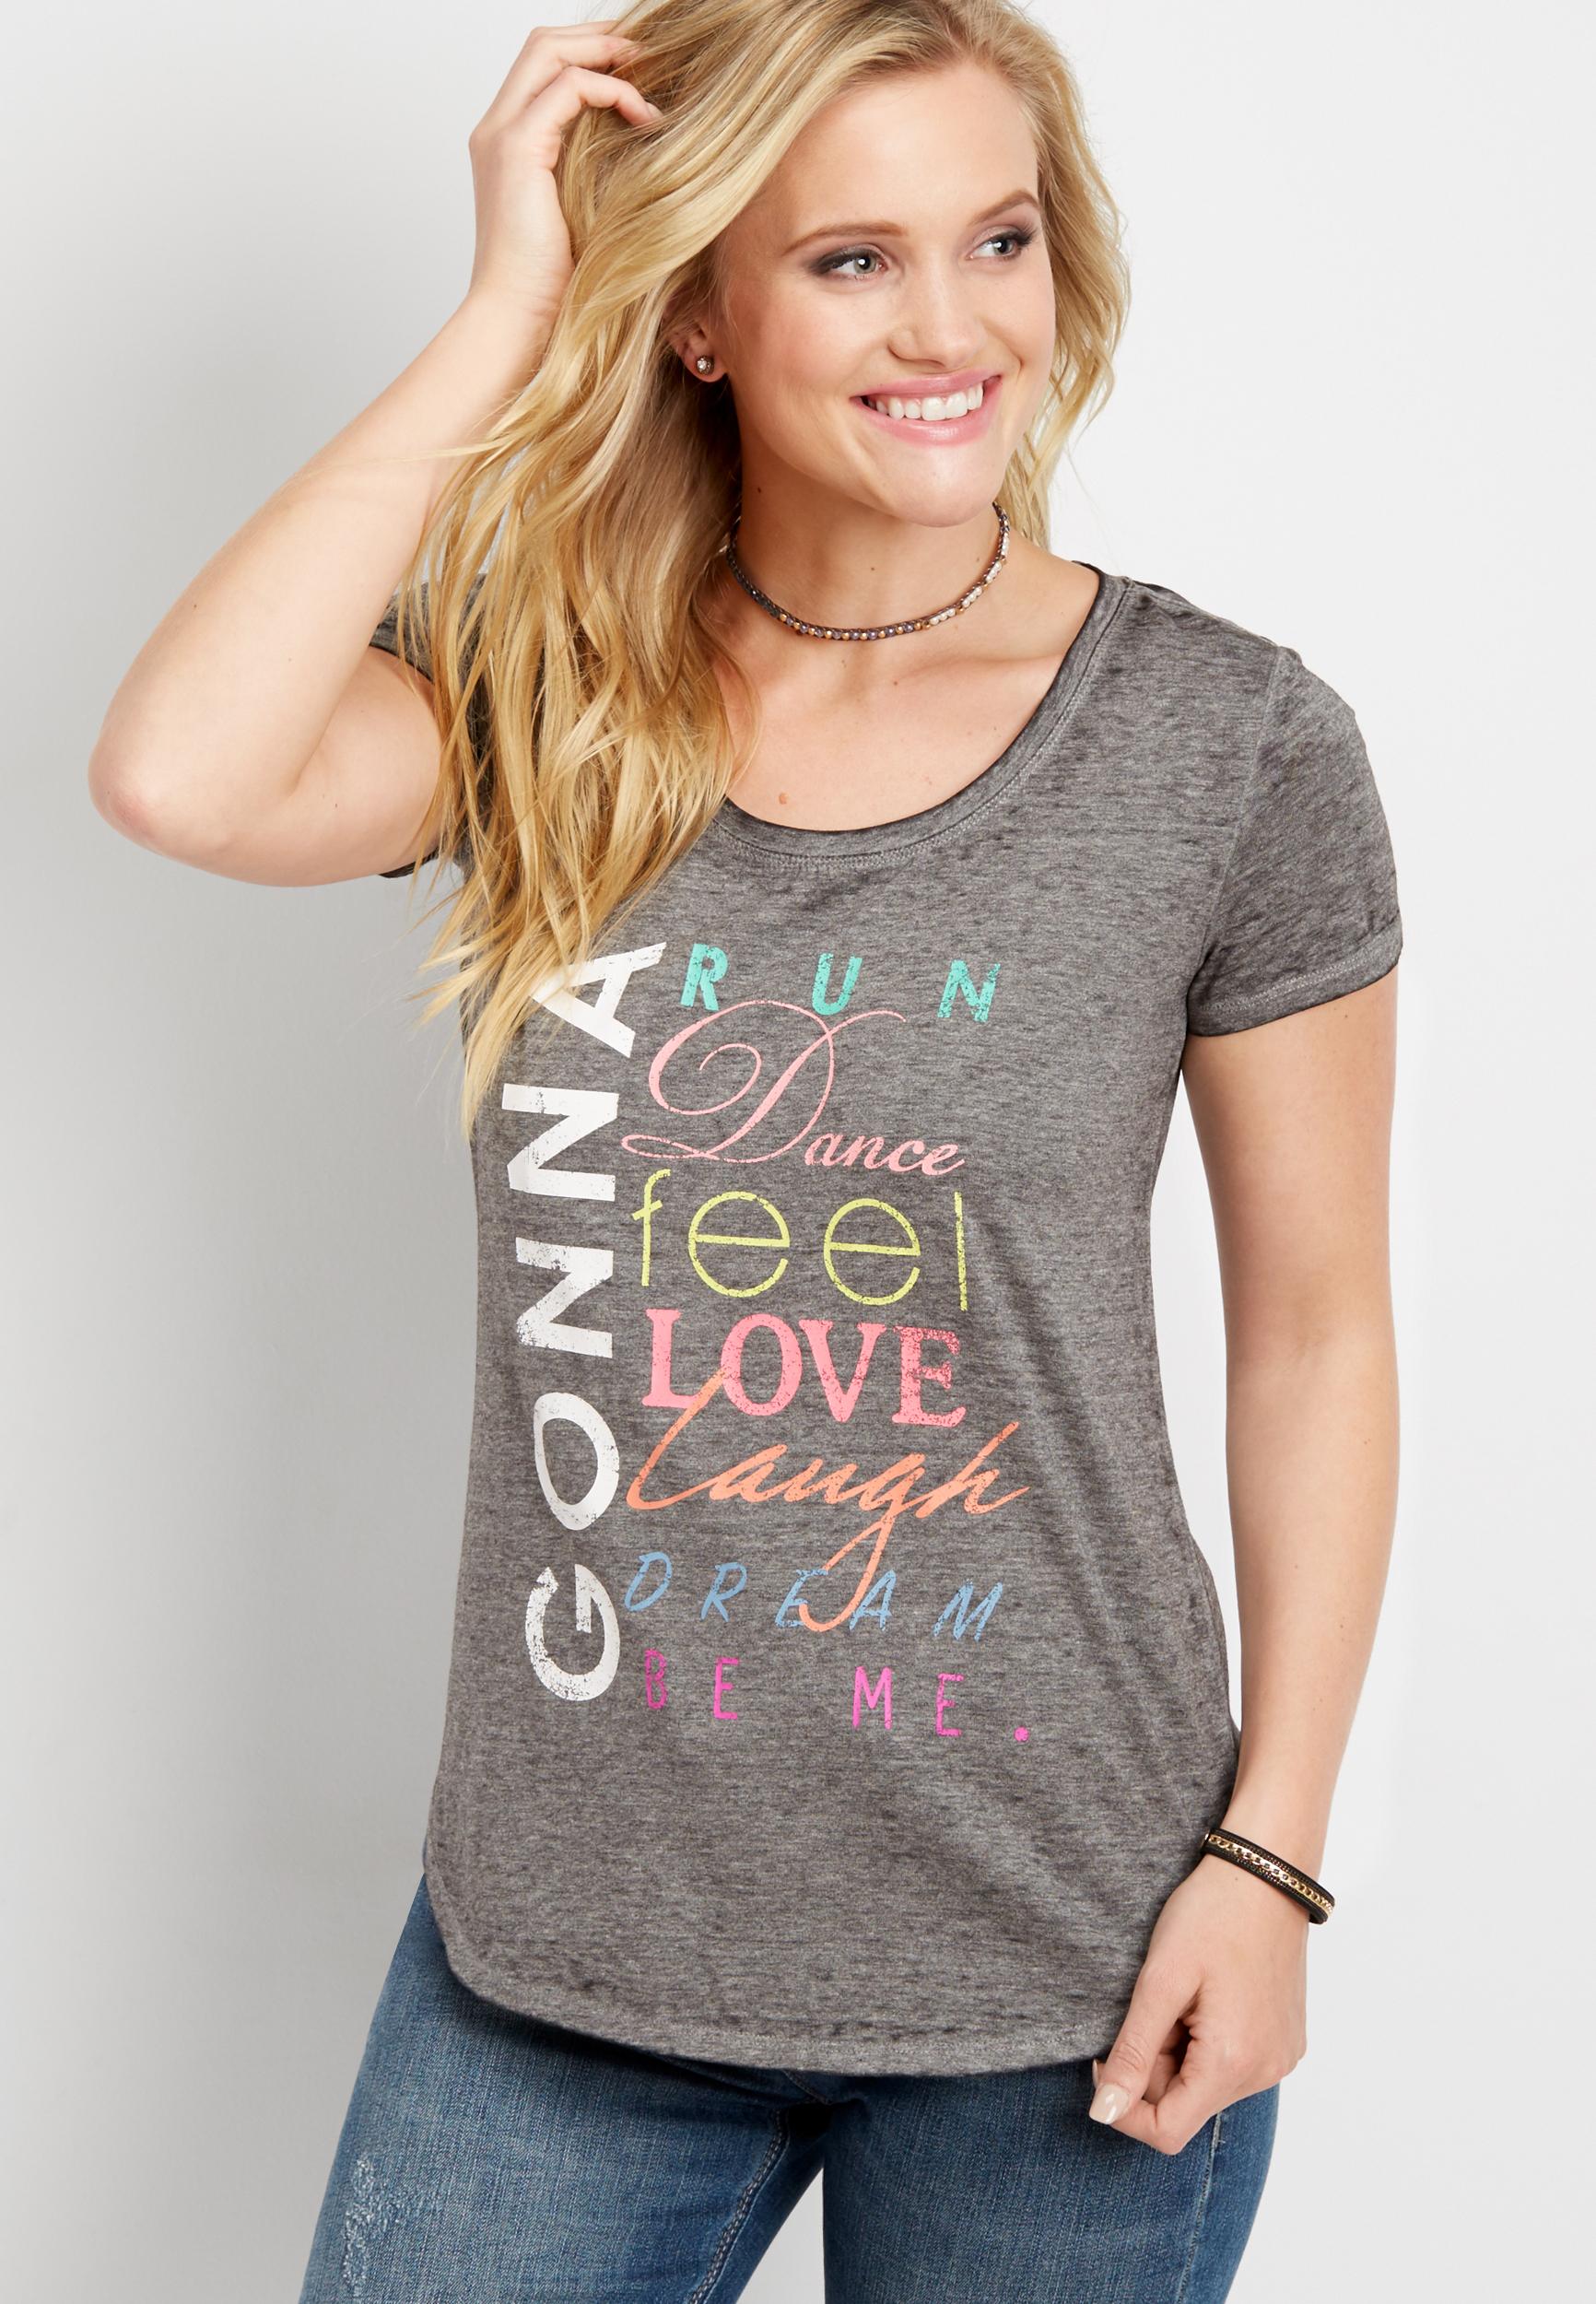 gonna be me graphic tee | maurices